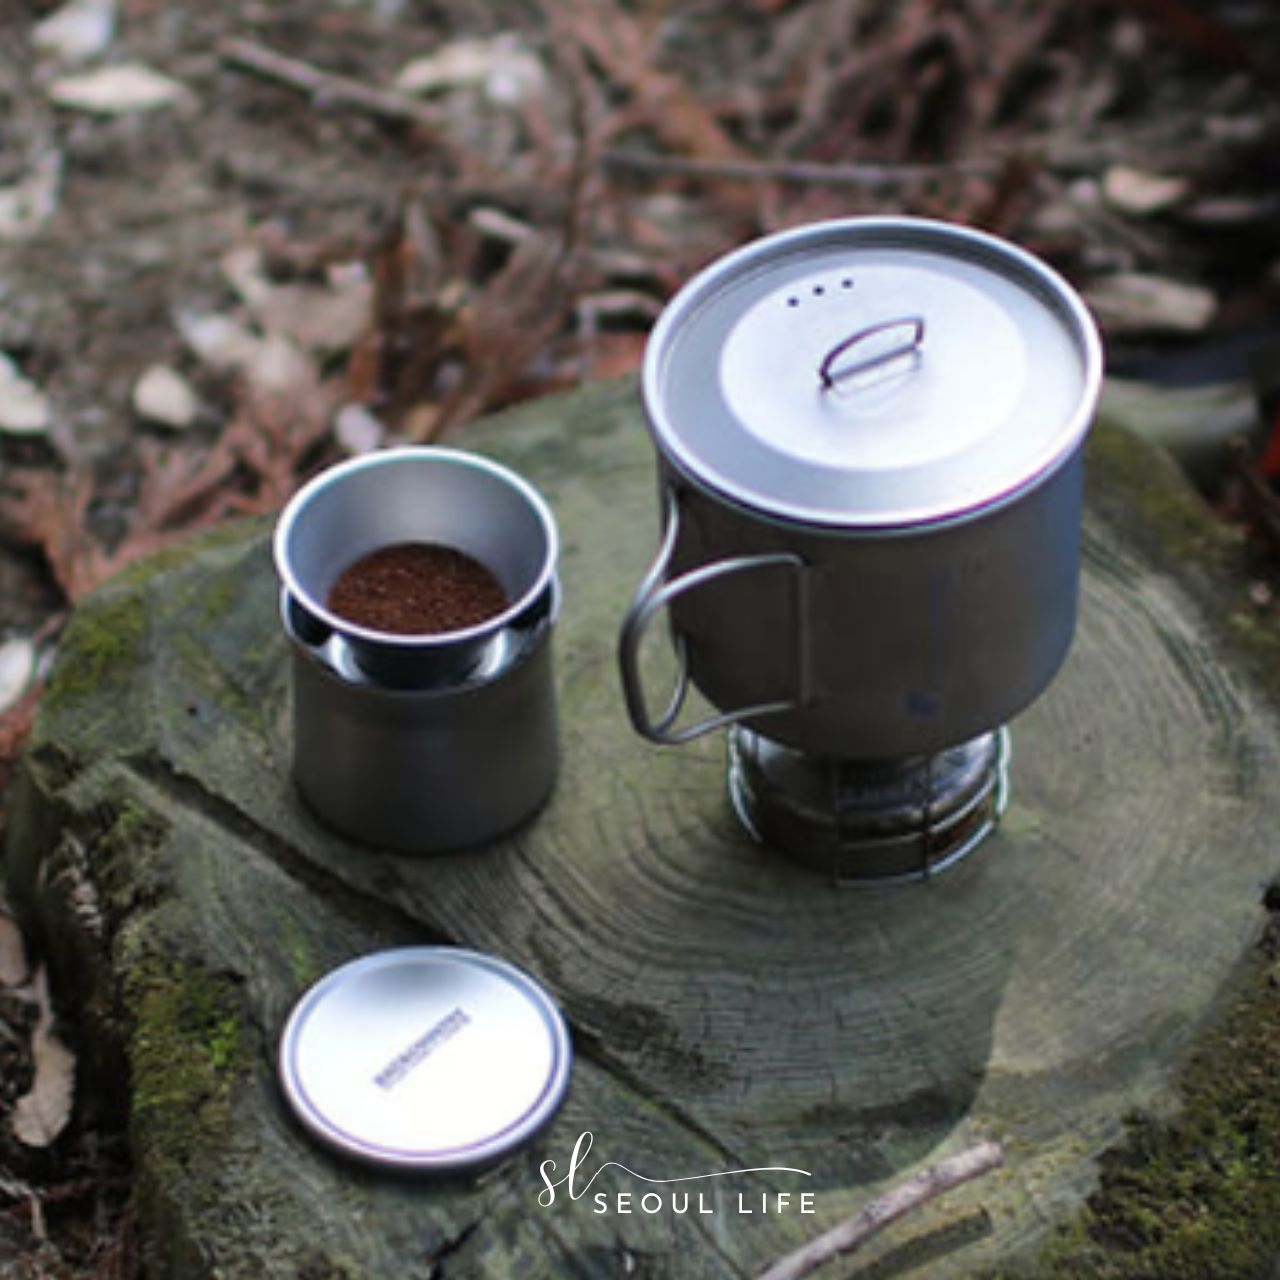 Titanium Coffee Maker for outdoors, Camping, Backpacking, Hiking, Traveling